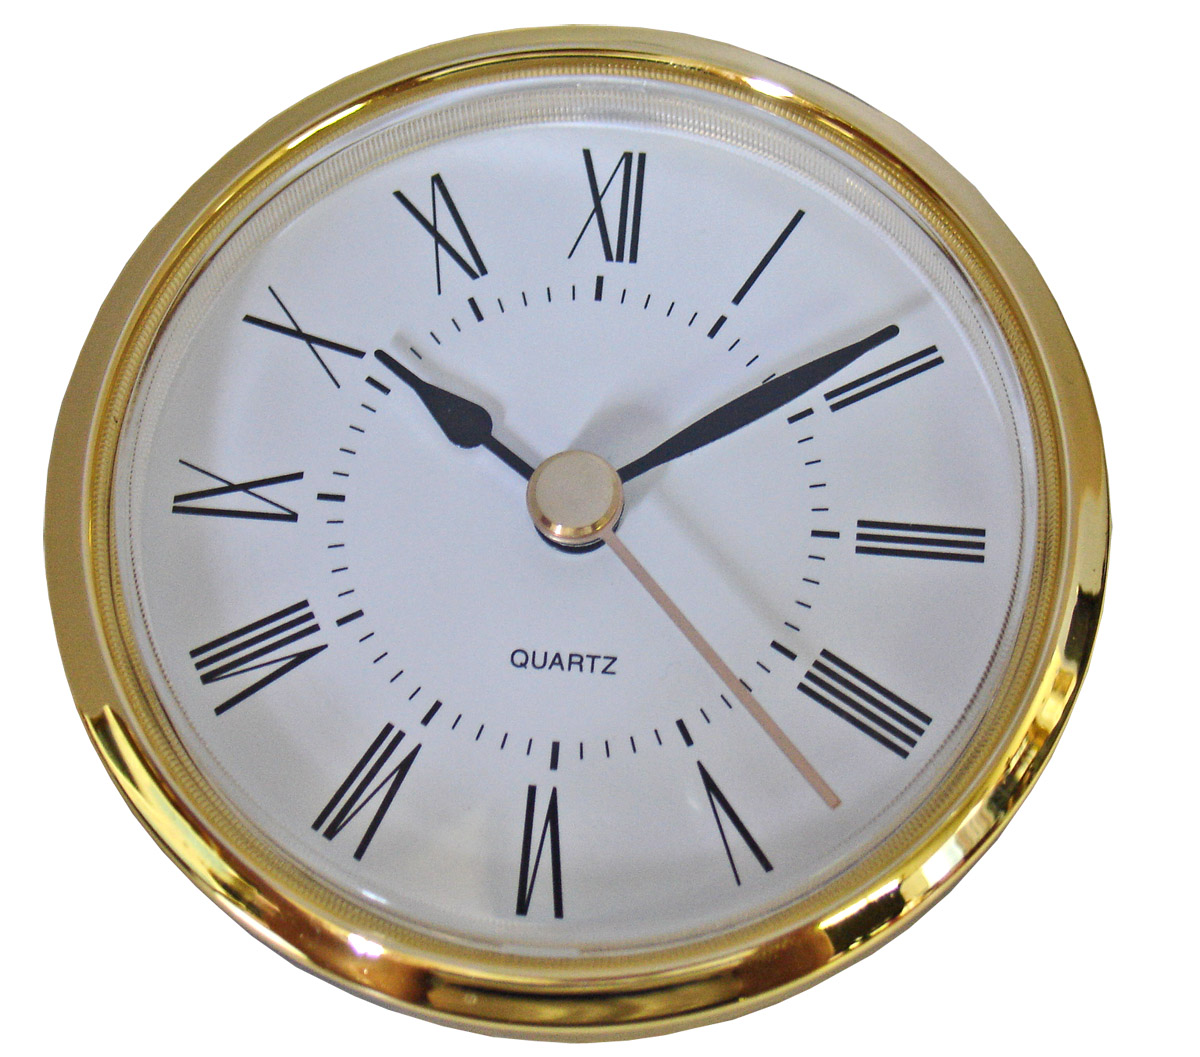 CLOCK FIT UP White Dial easy to read arabic #262 NEW, Insert 2 7/16" dia